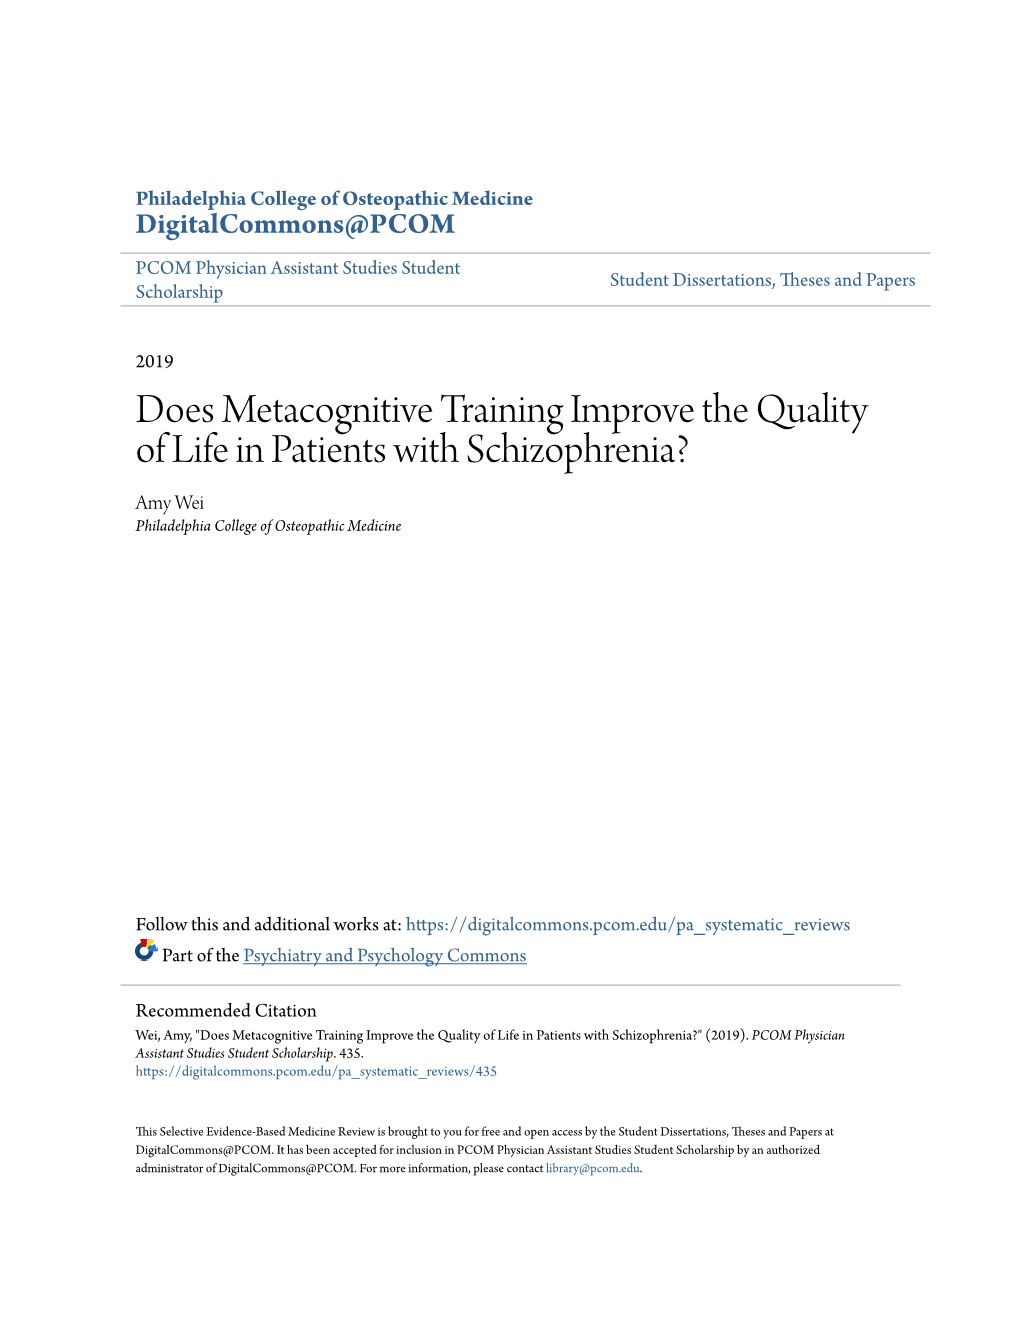 Does Metacognitive Training Improve the Quality of Life in Patients with Schizophrenia? Amy Wei Philadelphia College of Osteopathic Medicine